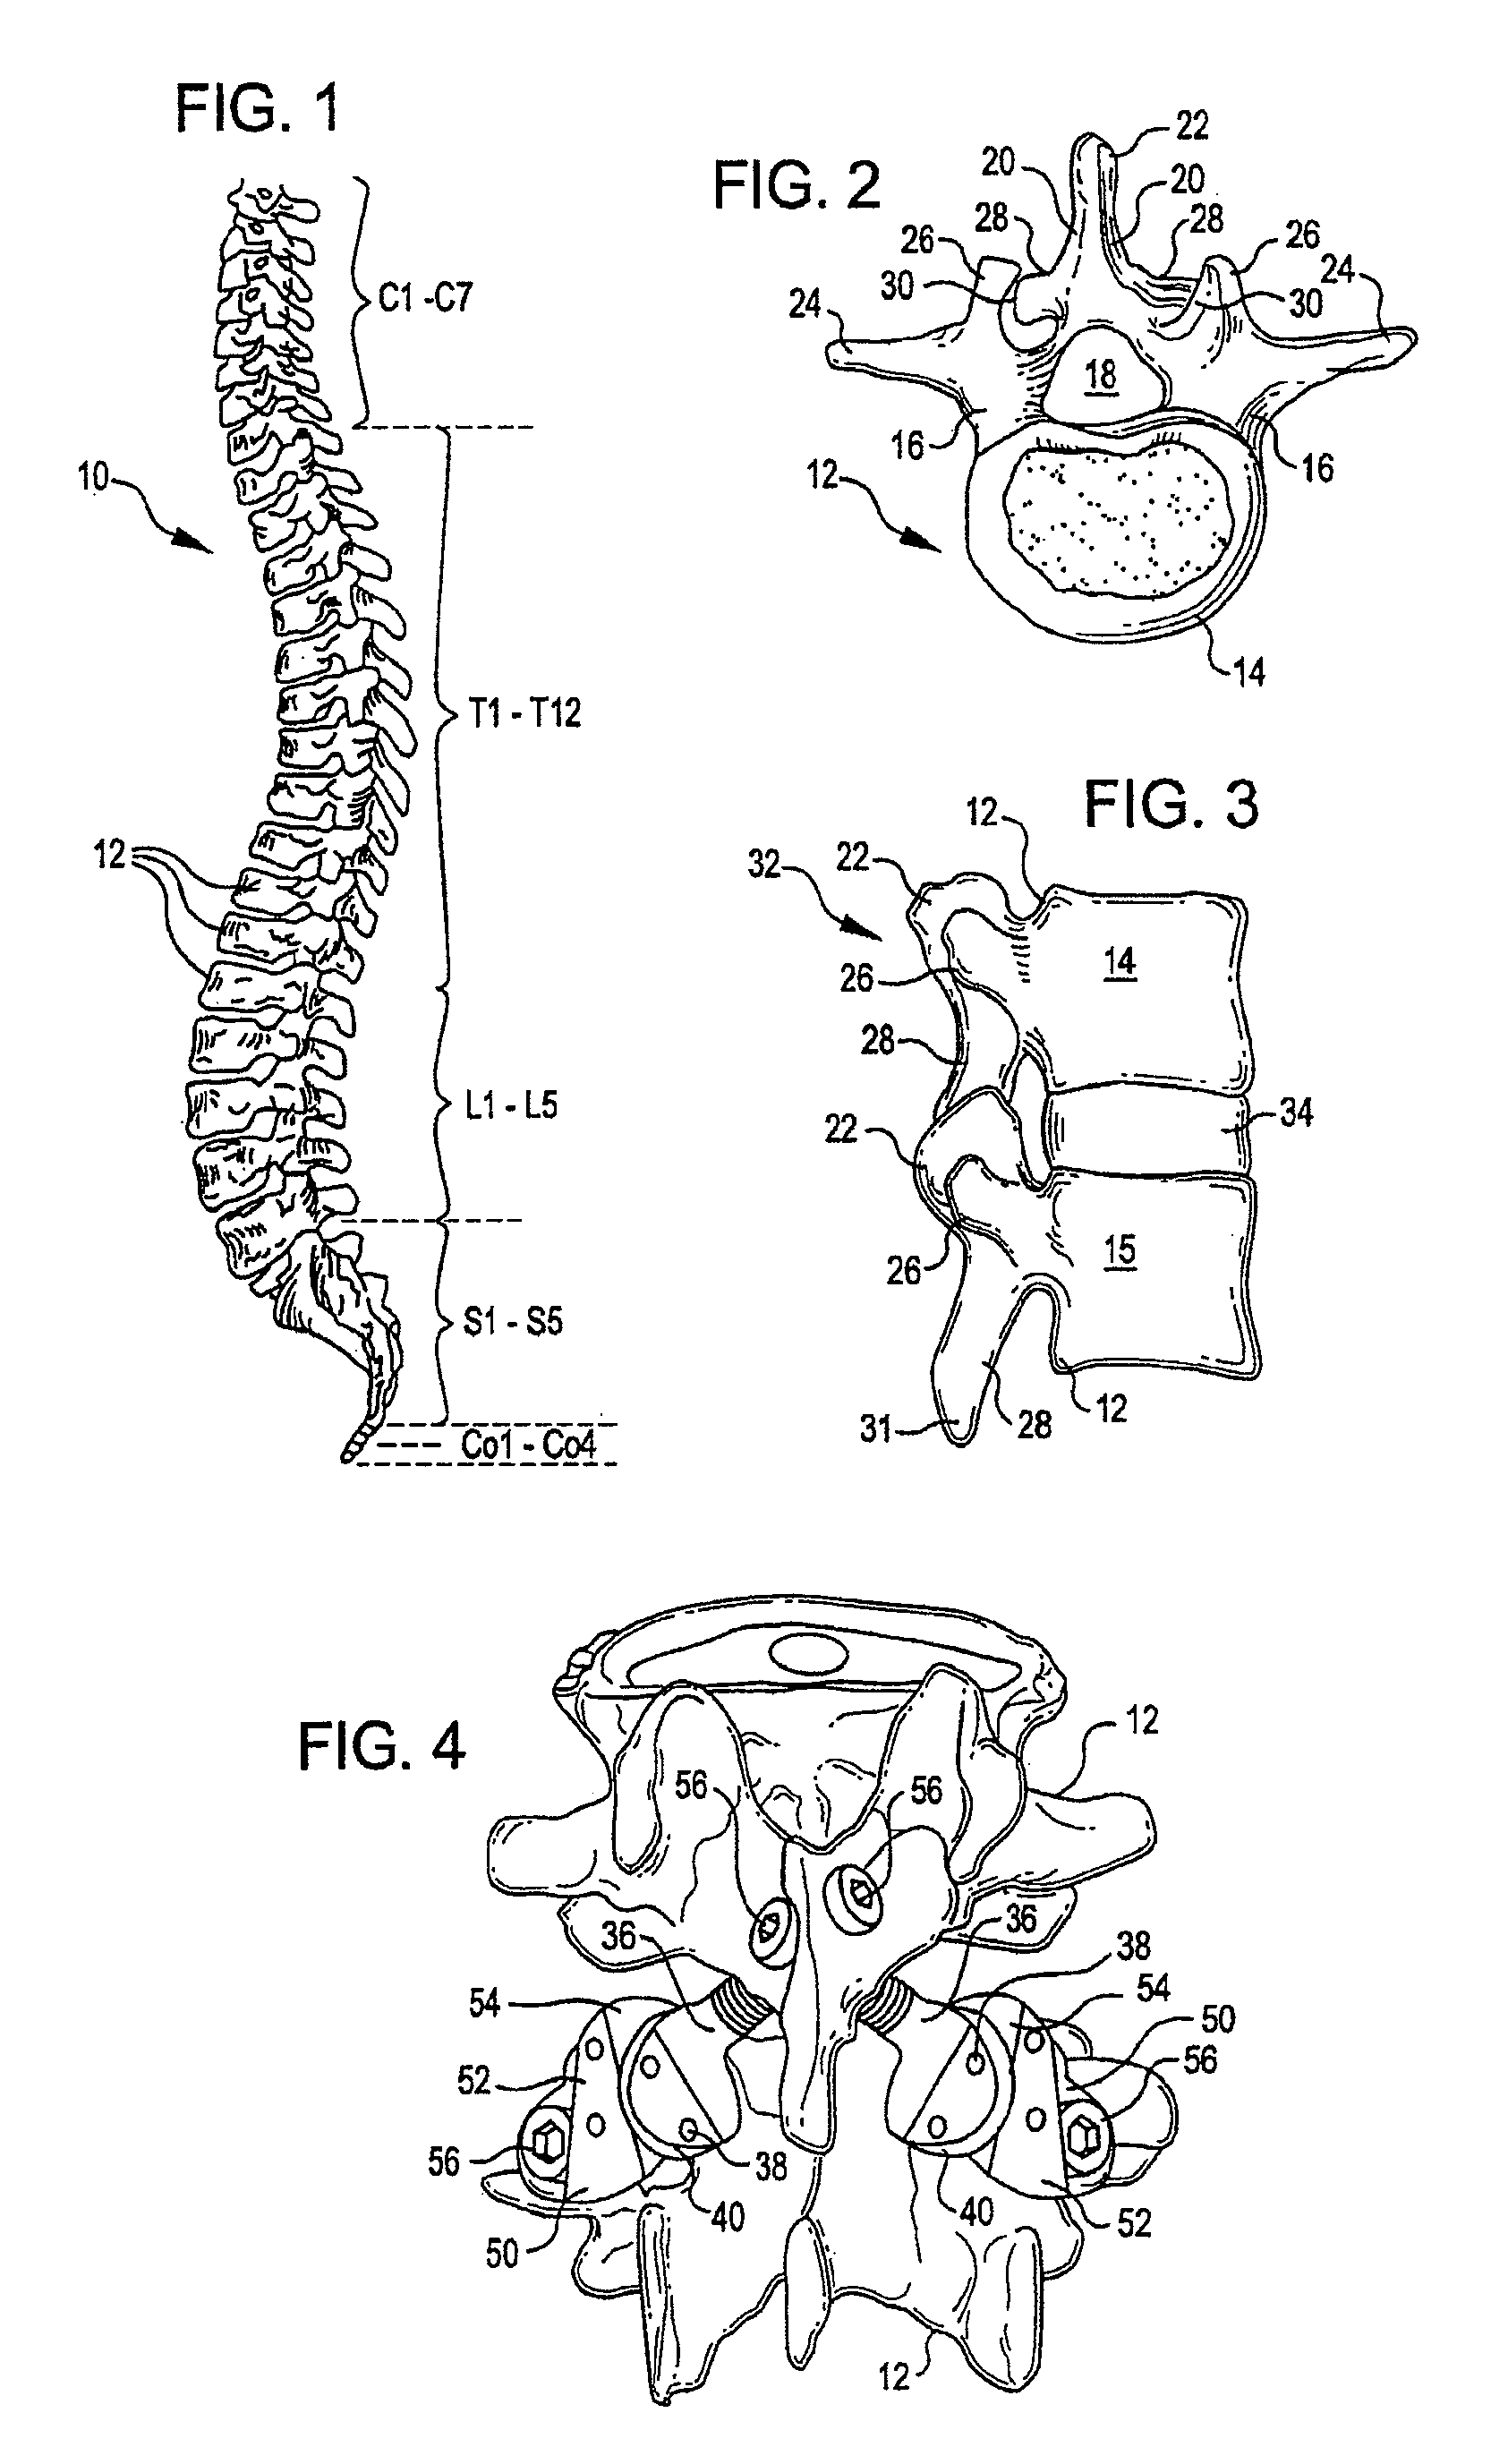 Crossbar spinal prosthesis having a modular design and systems for treating spinal pathologies